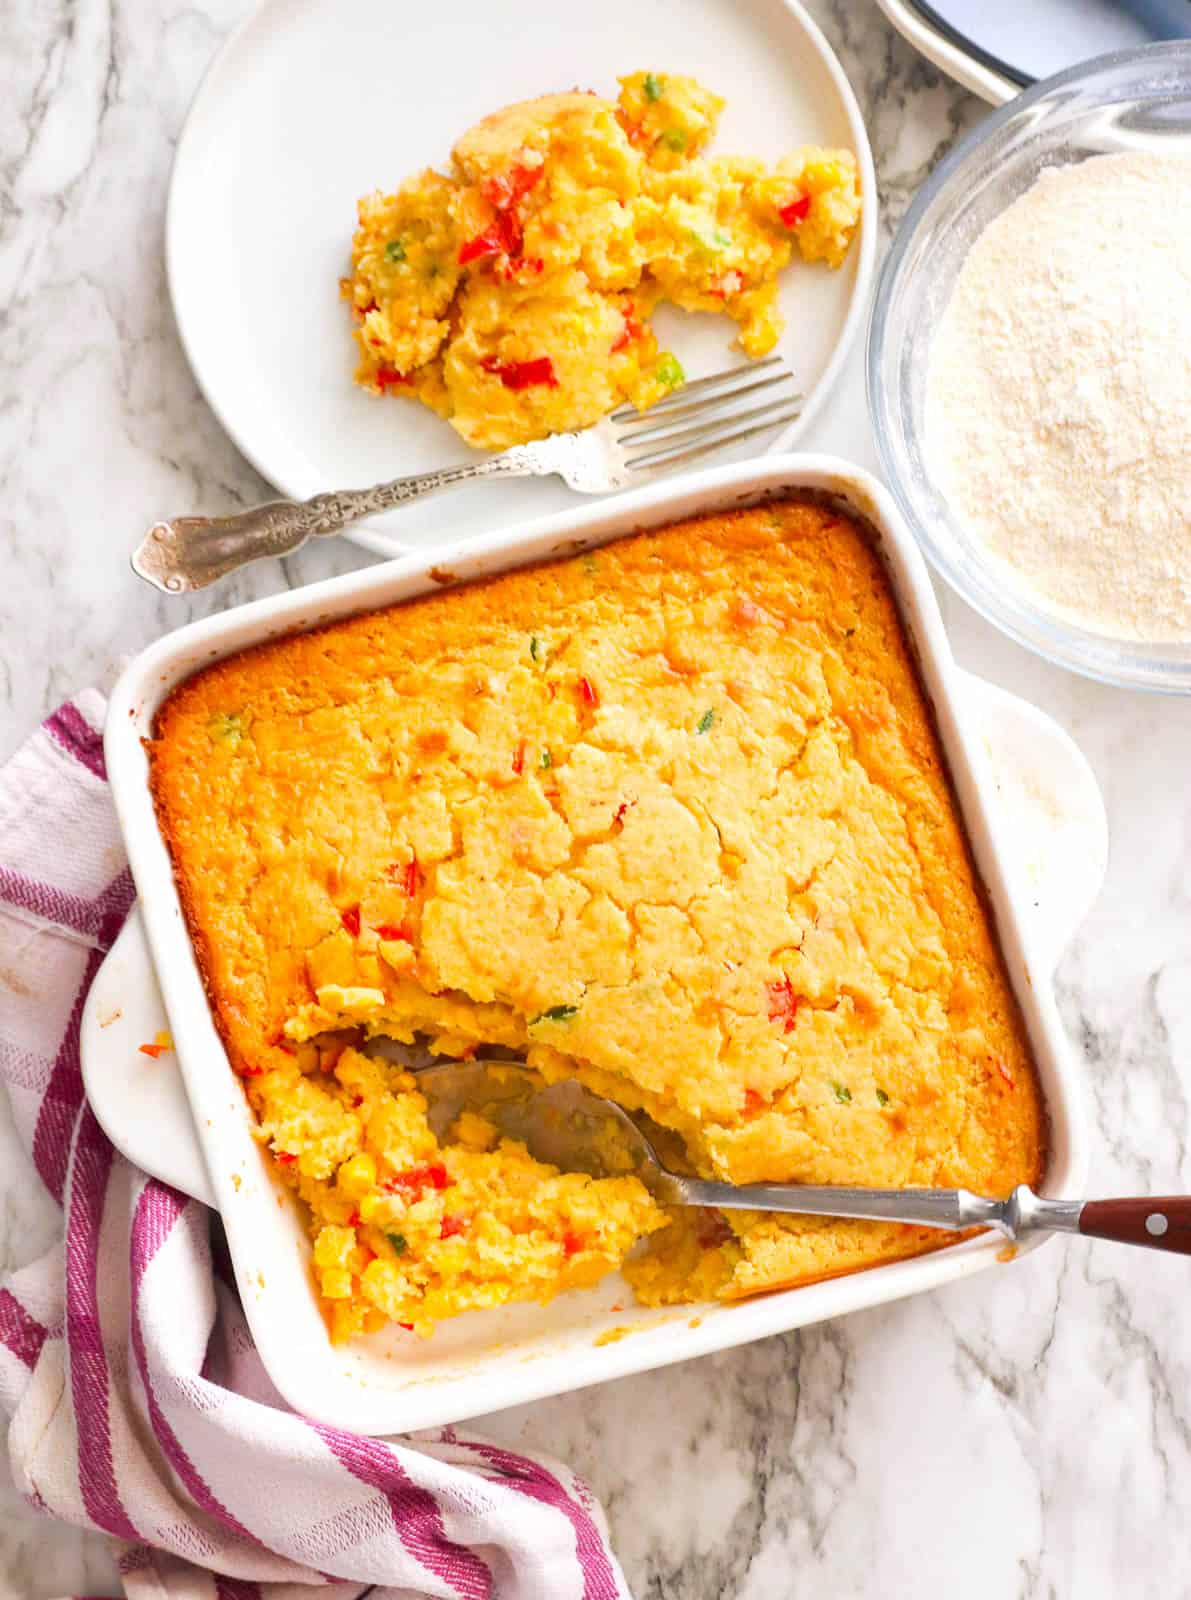 Jiffy corn casserole fresh from the oven for a great comfort food